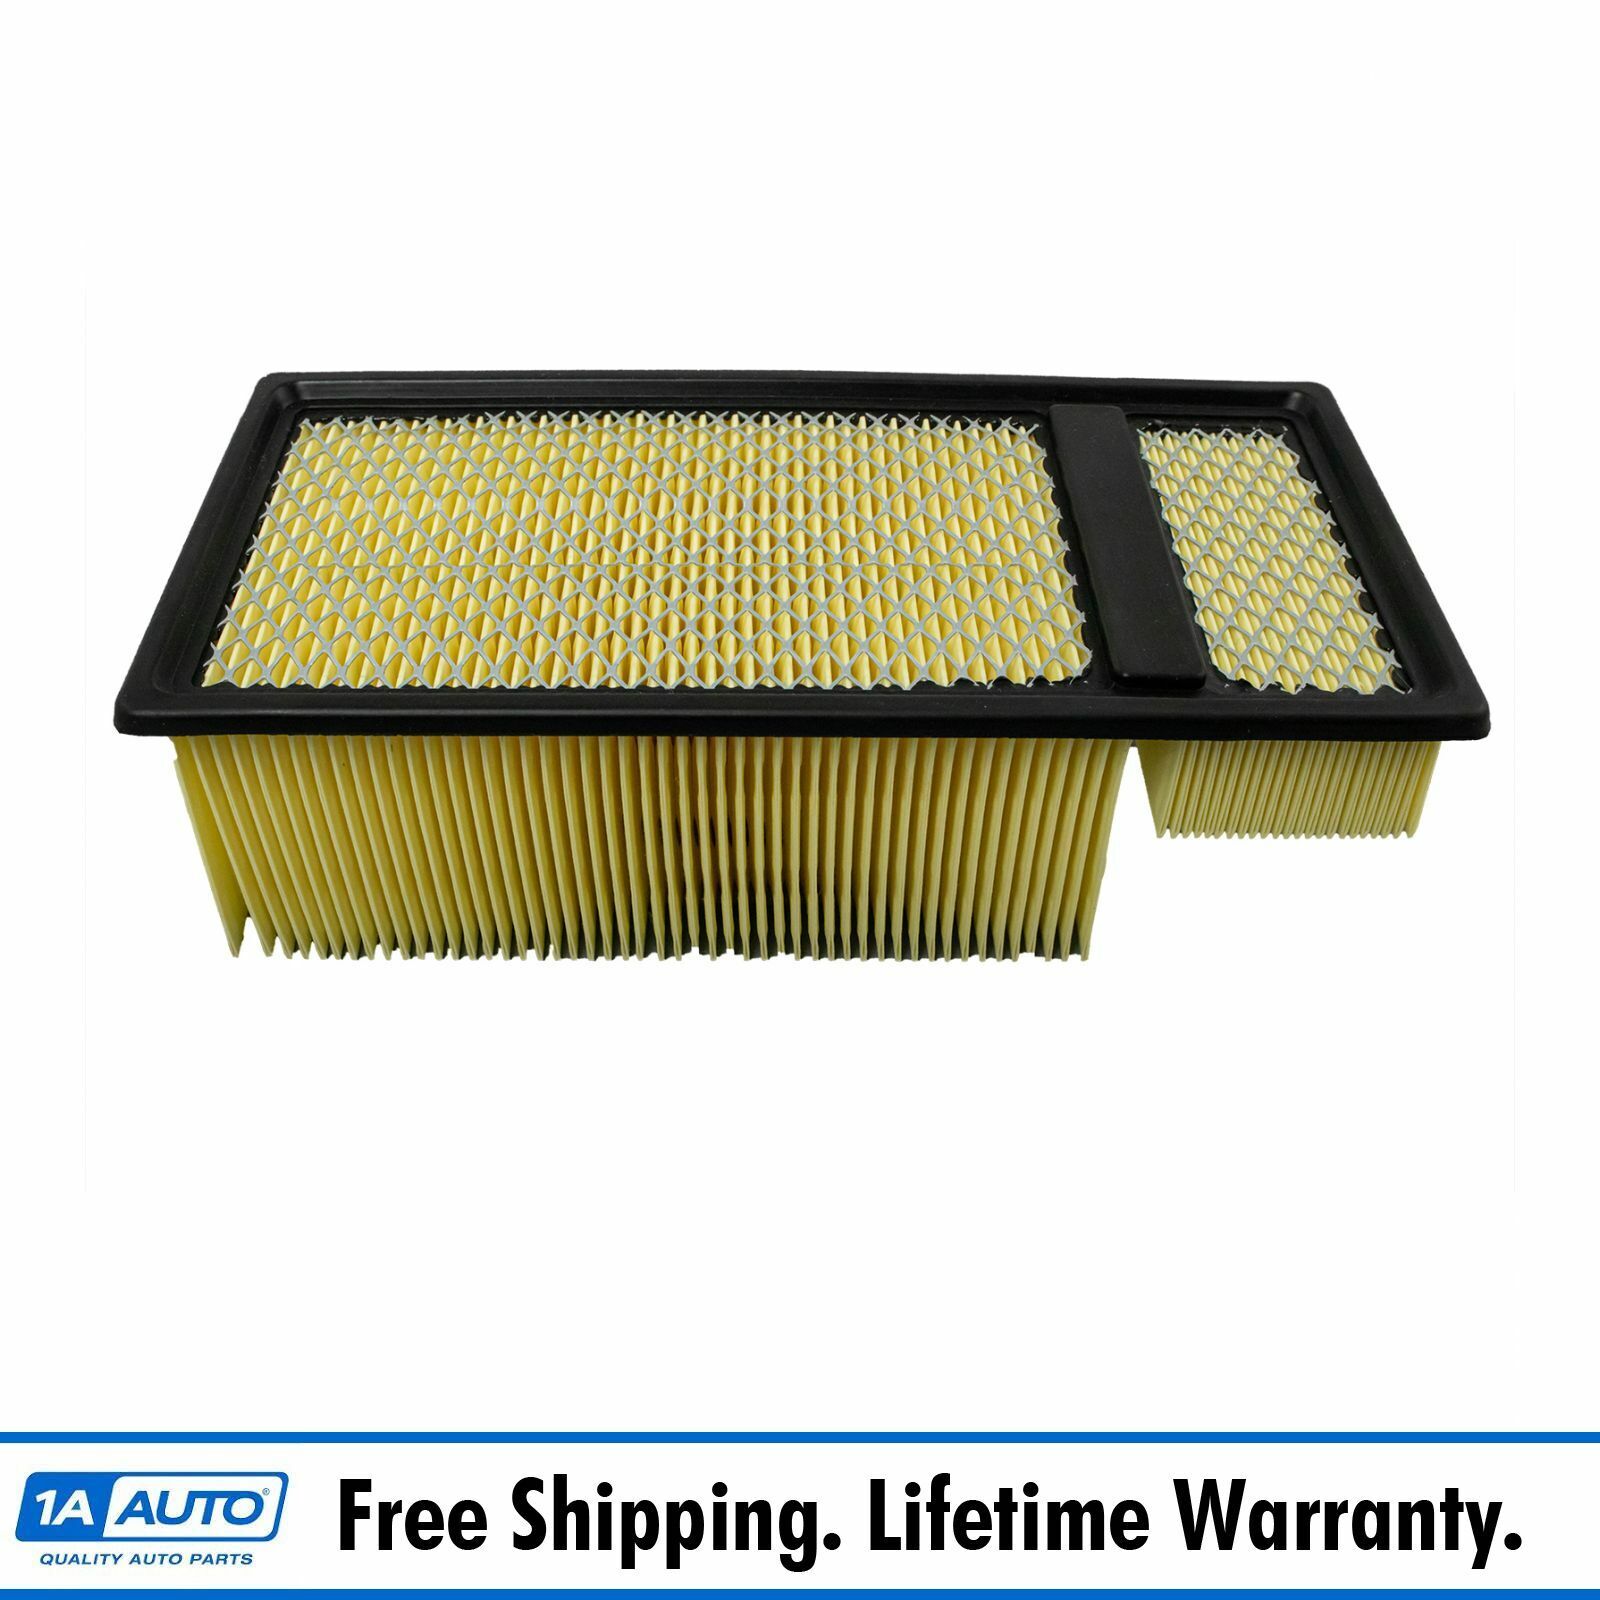 Ecogard XA6109 Replacement Engine Air Filter for Ford Super Duty 6.7L